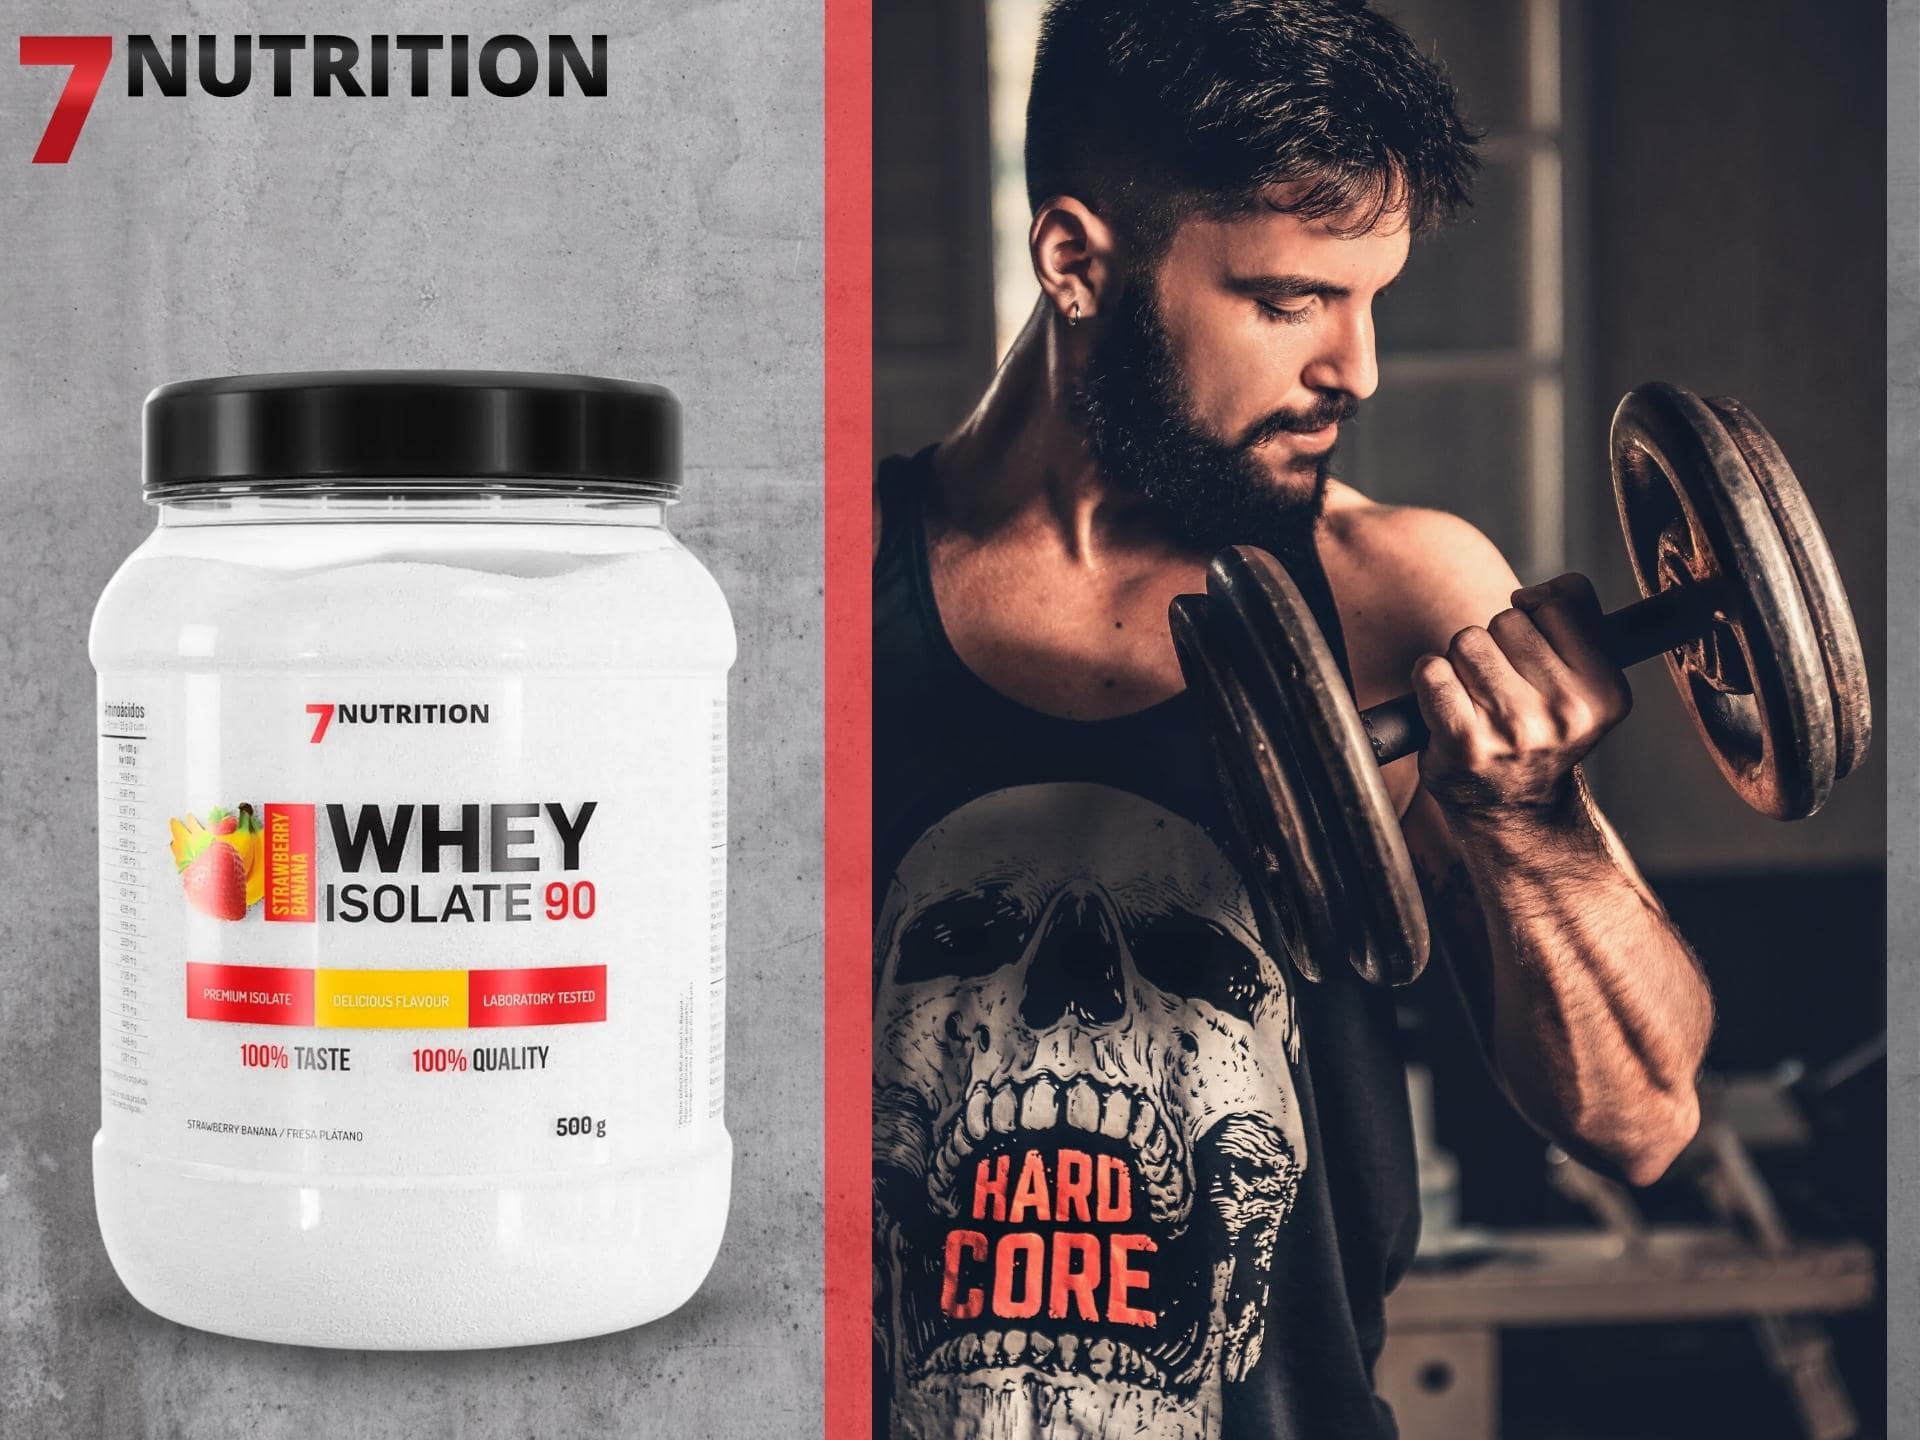 7 NUTRITION Whey Isolate 90 - 500g